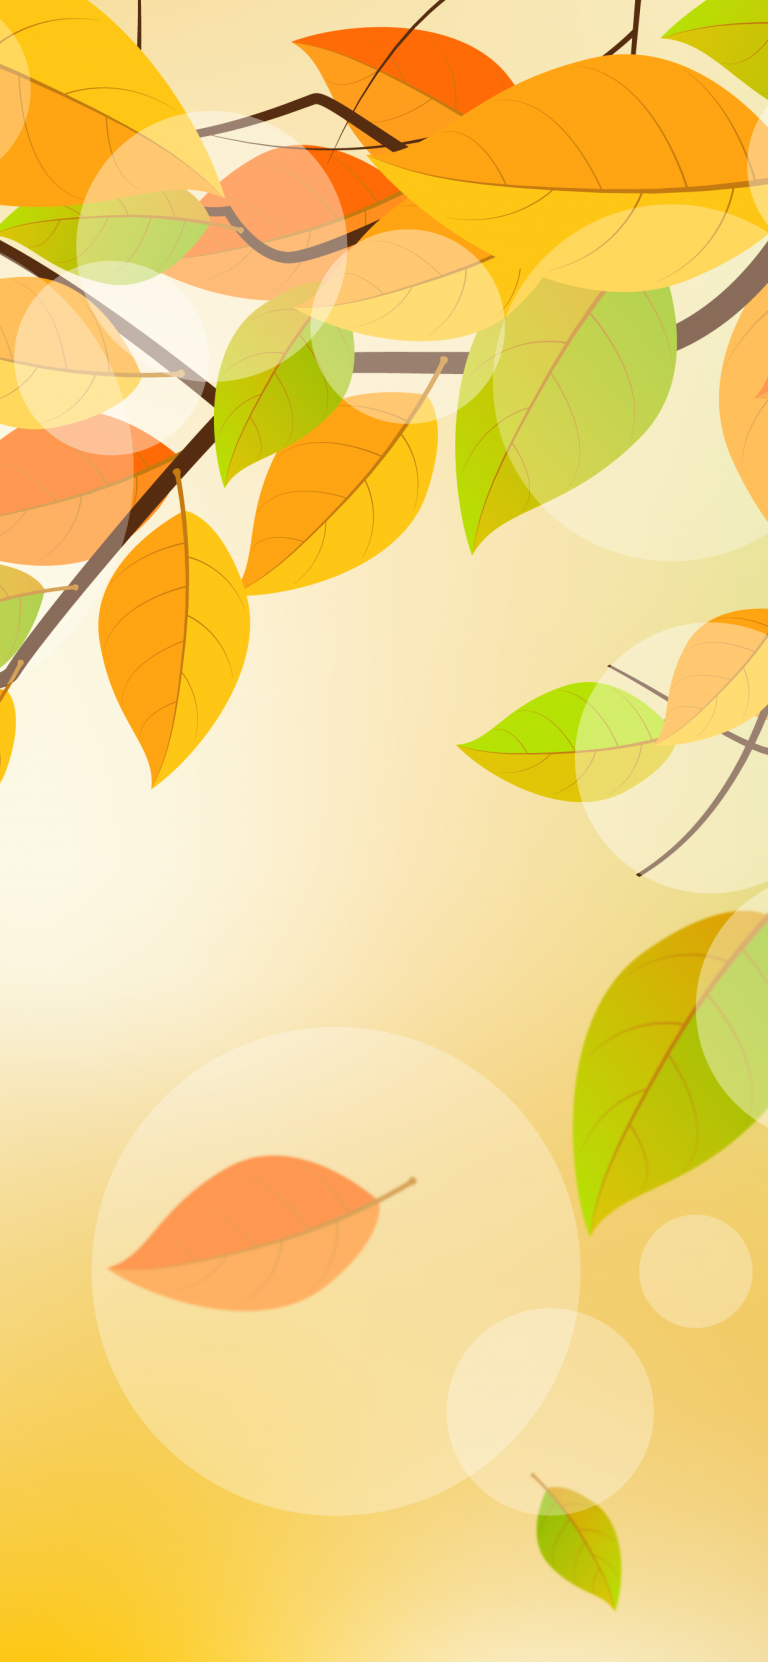 Autumn Wallpapers for iPhone and iPad